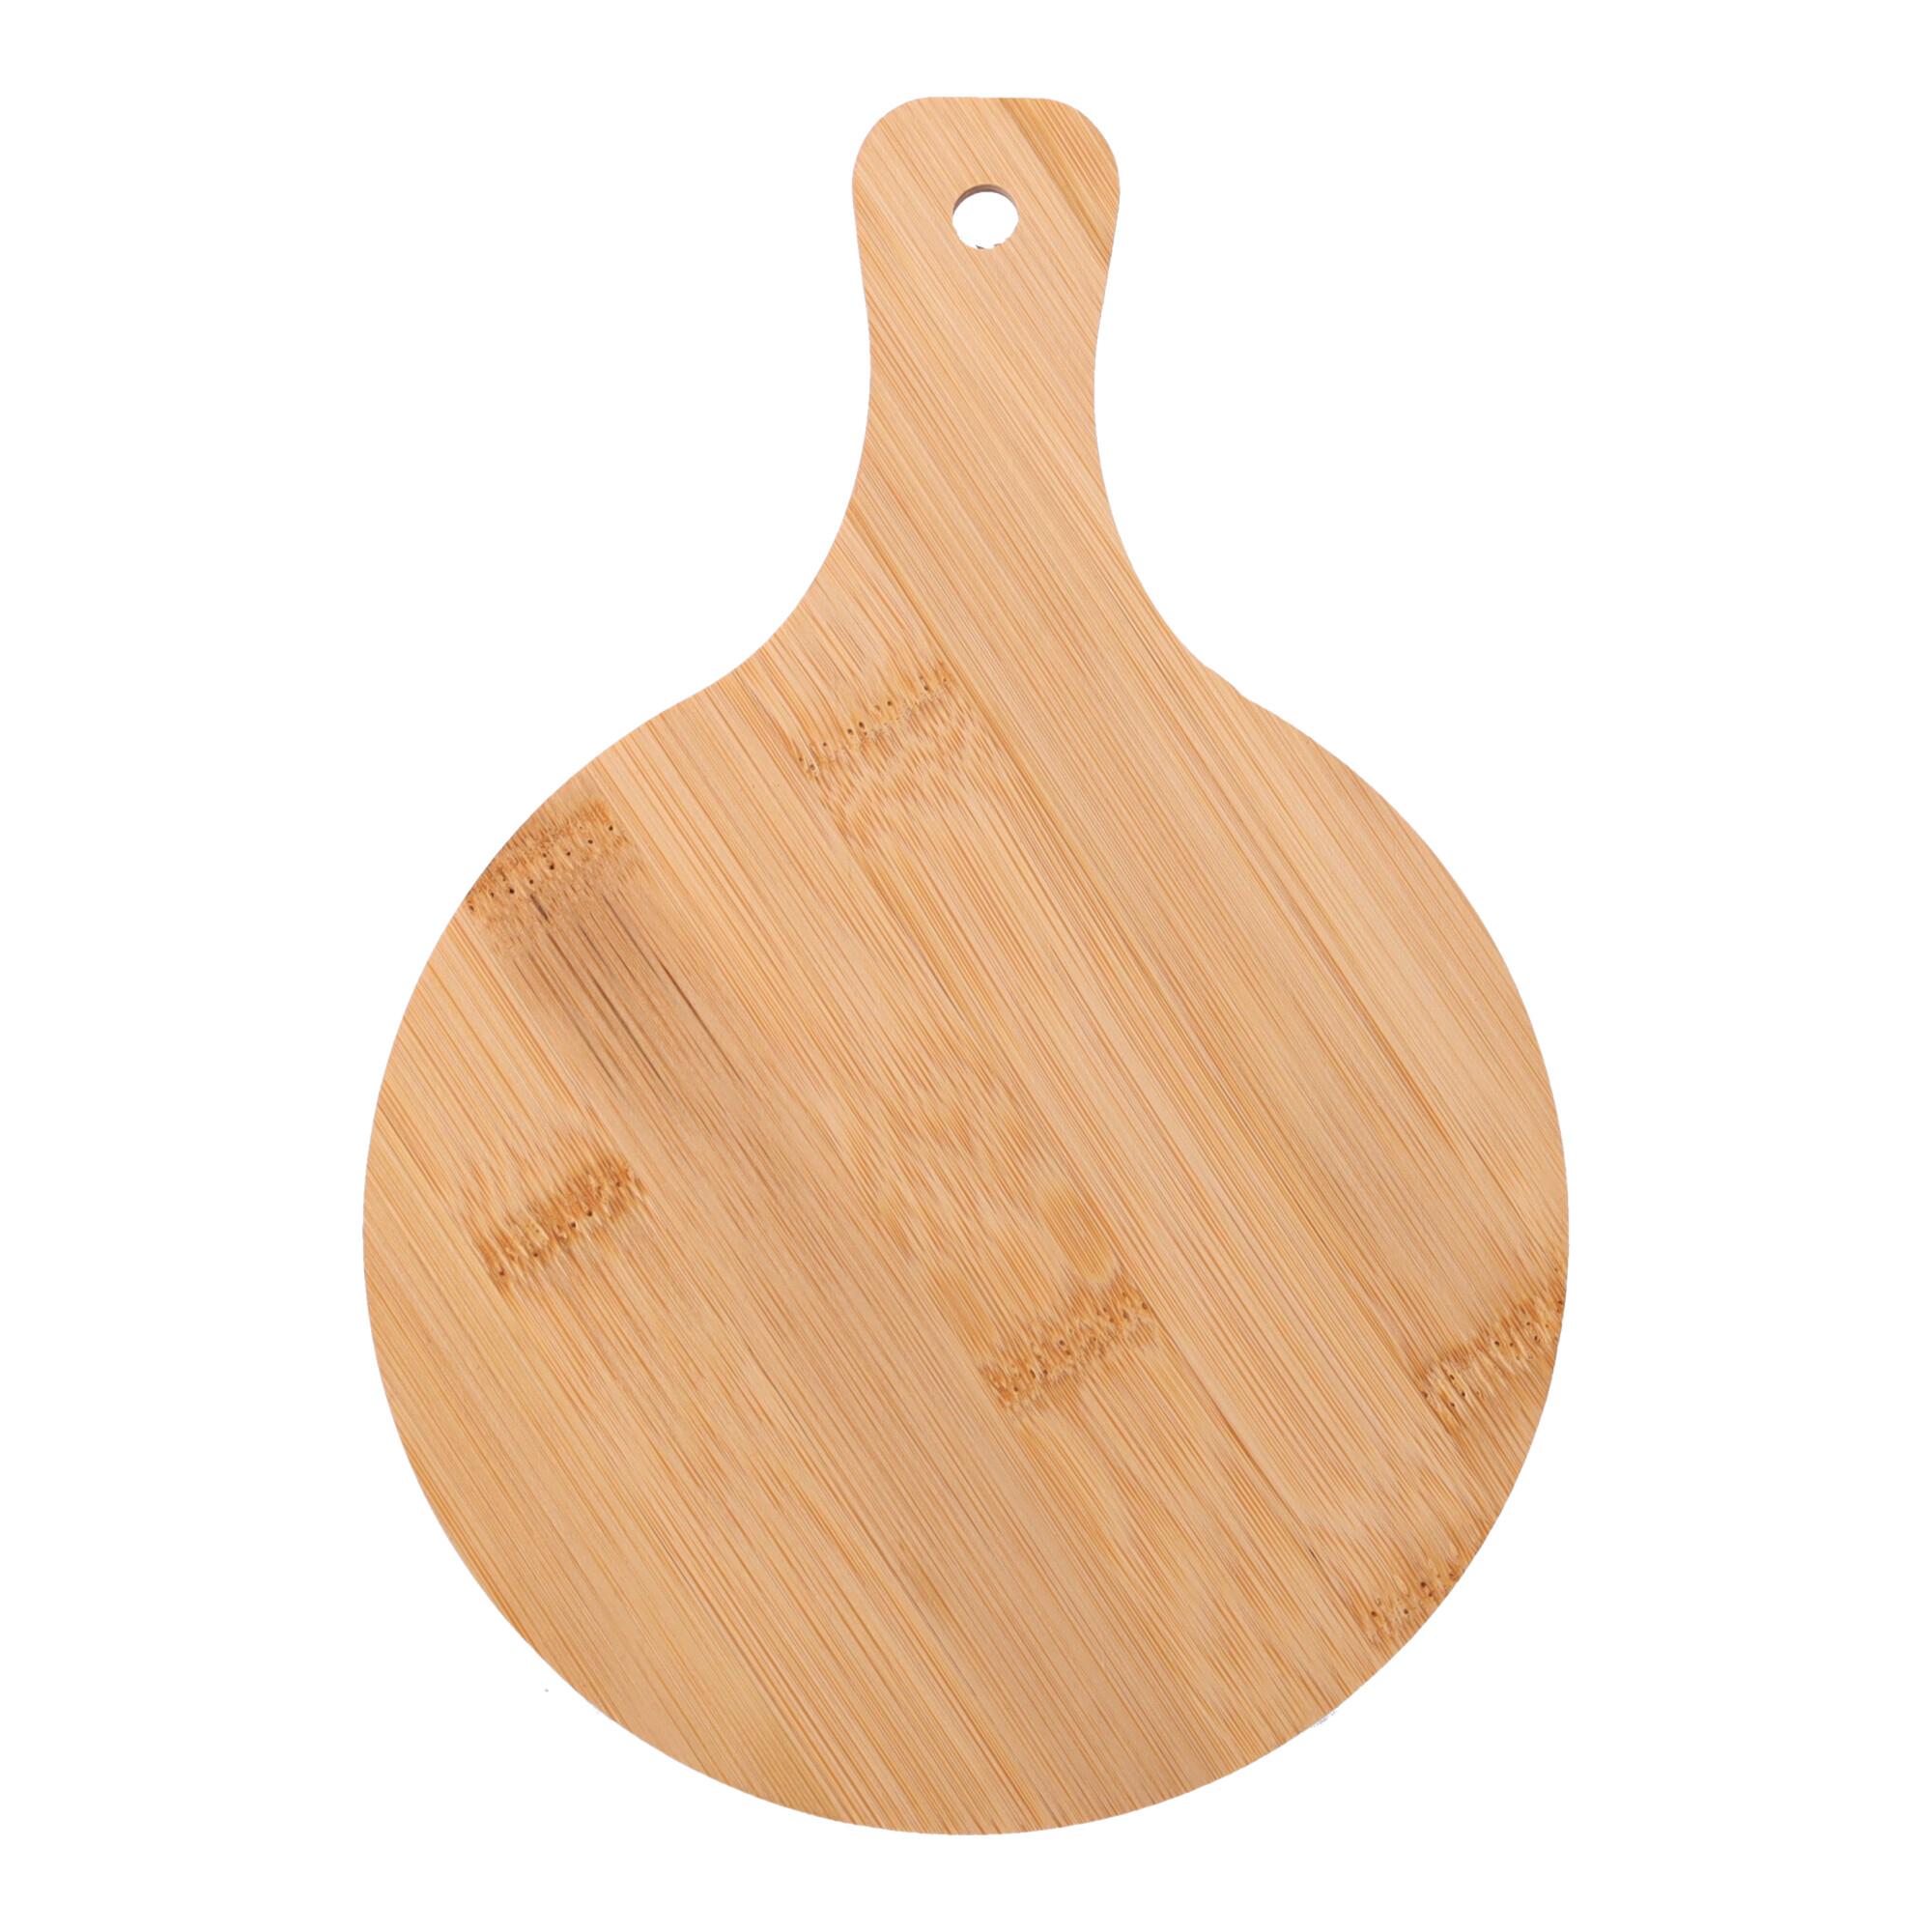 Wooden pizza board - round, size 22*15*1,2